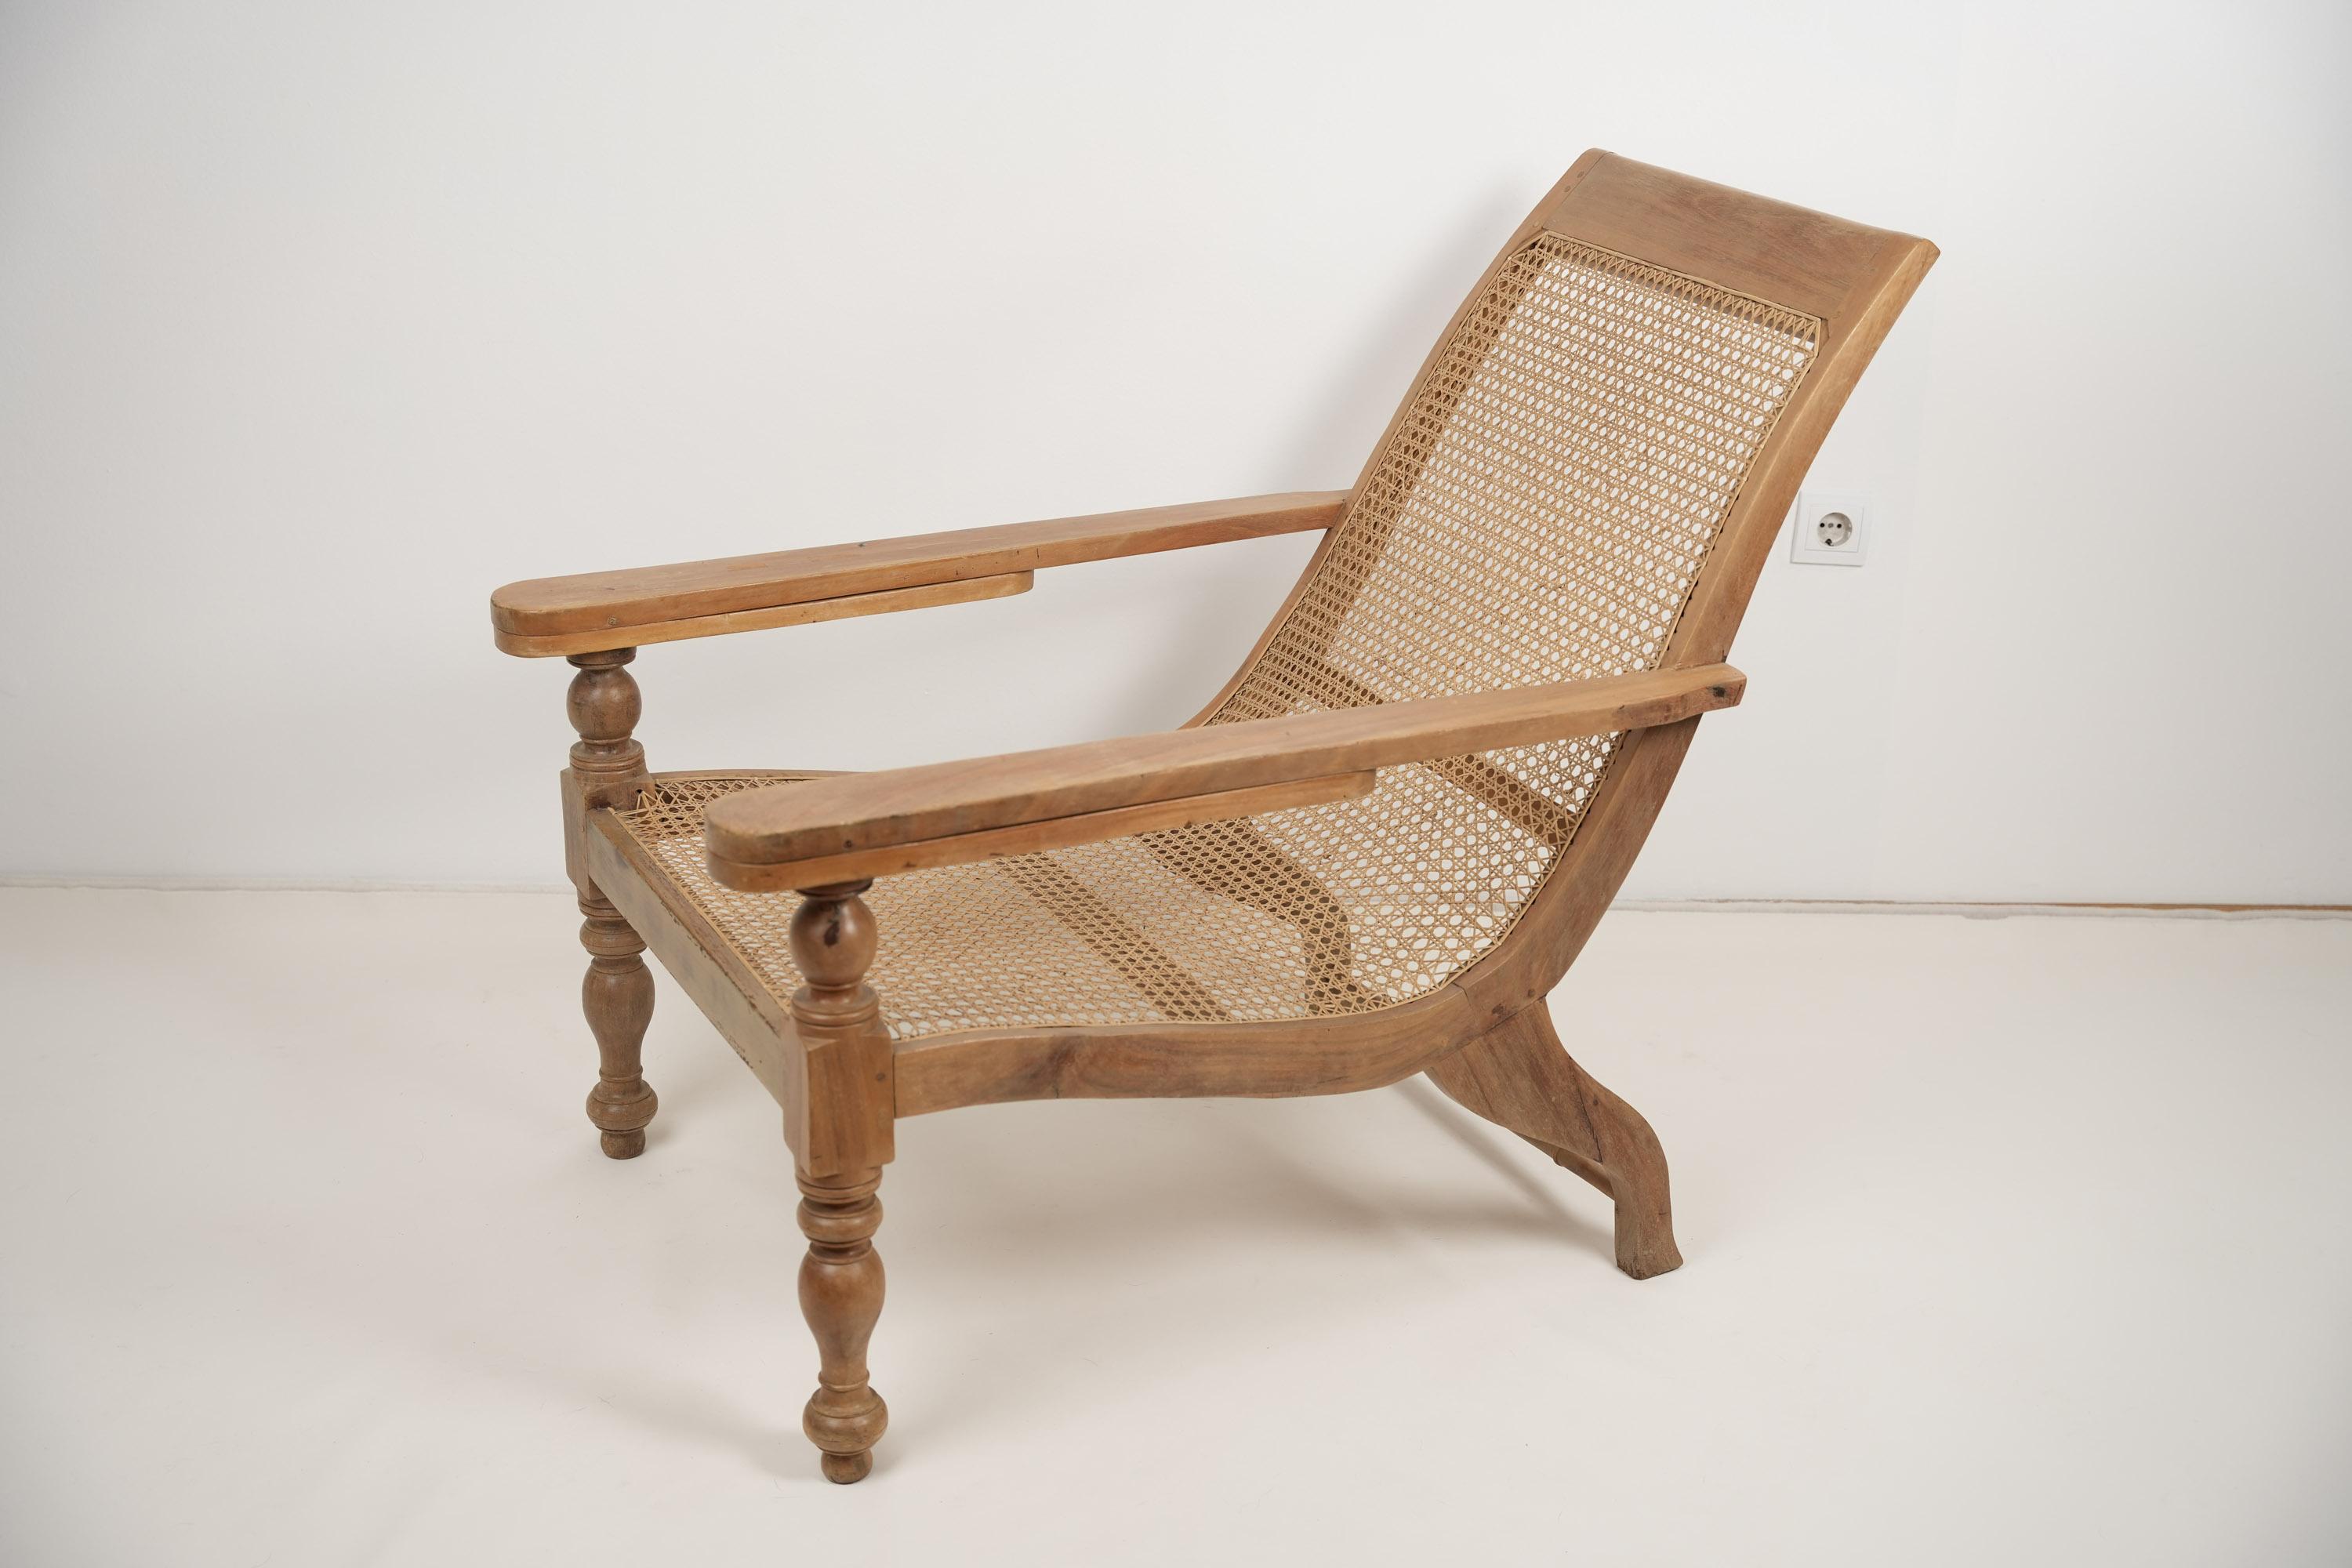 Early 20th Century 19th Century Anglo Indian Inlaid Plantation Chair with Extending Arms For Sale